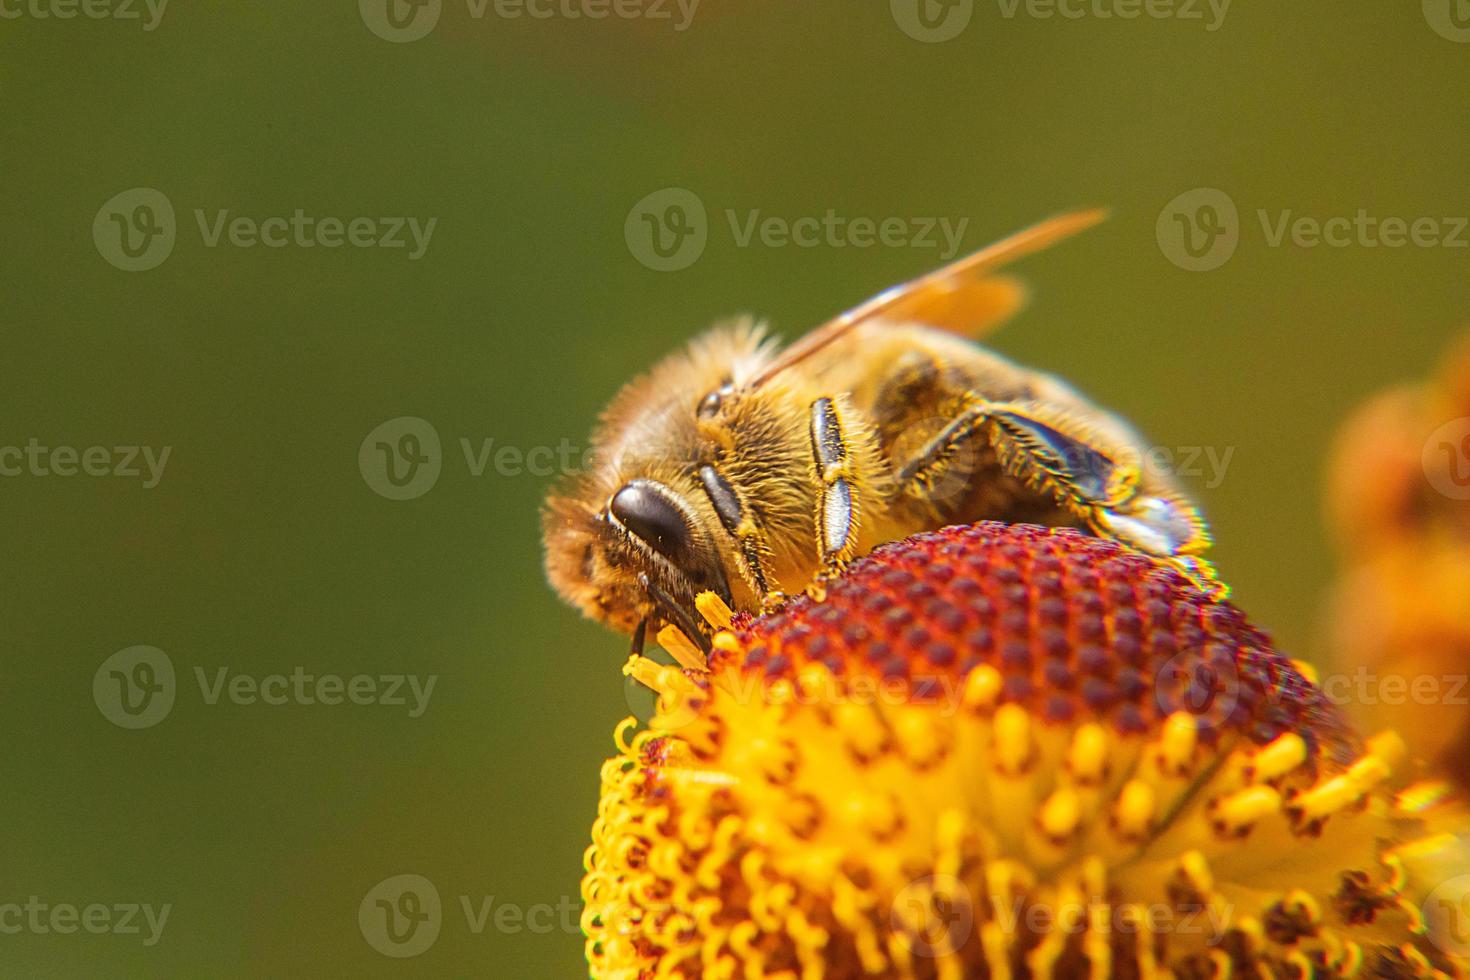 Honey bee covered with yellow pollen drink nectar, pollinating flower. Inspirational natural floral spring or summer blooming garden background. Life of insects, Extreme macro close up selective focus photo